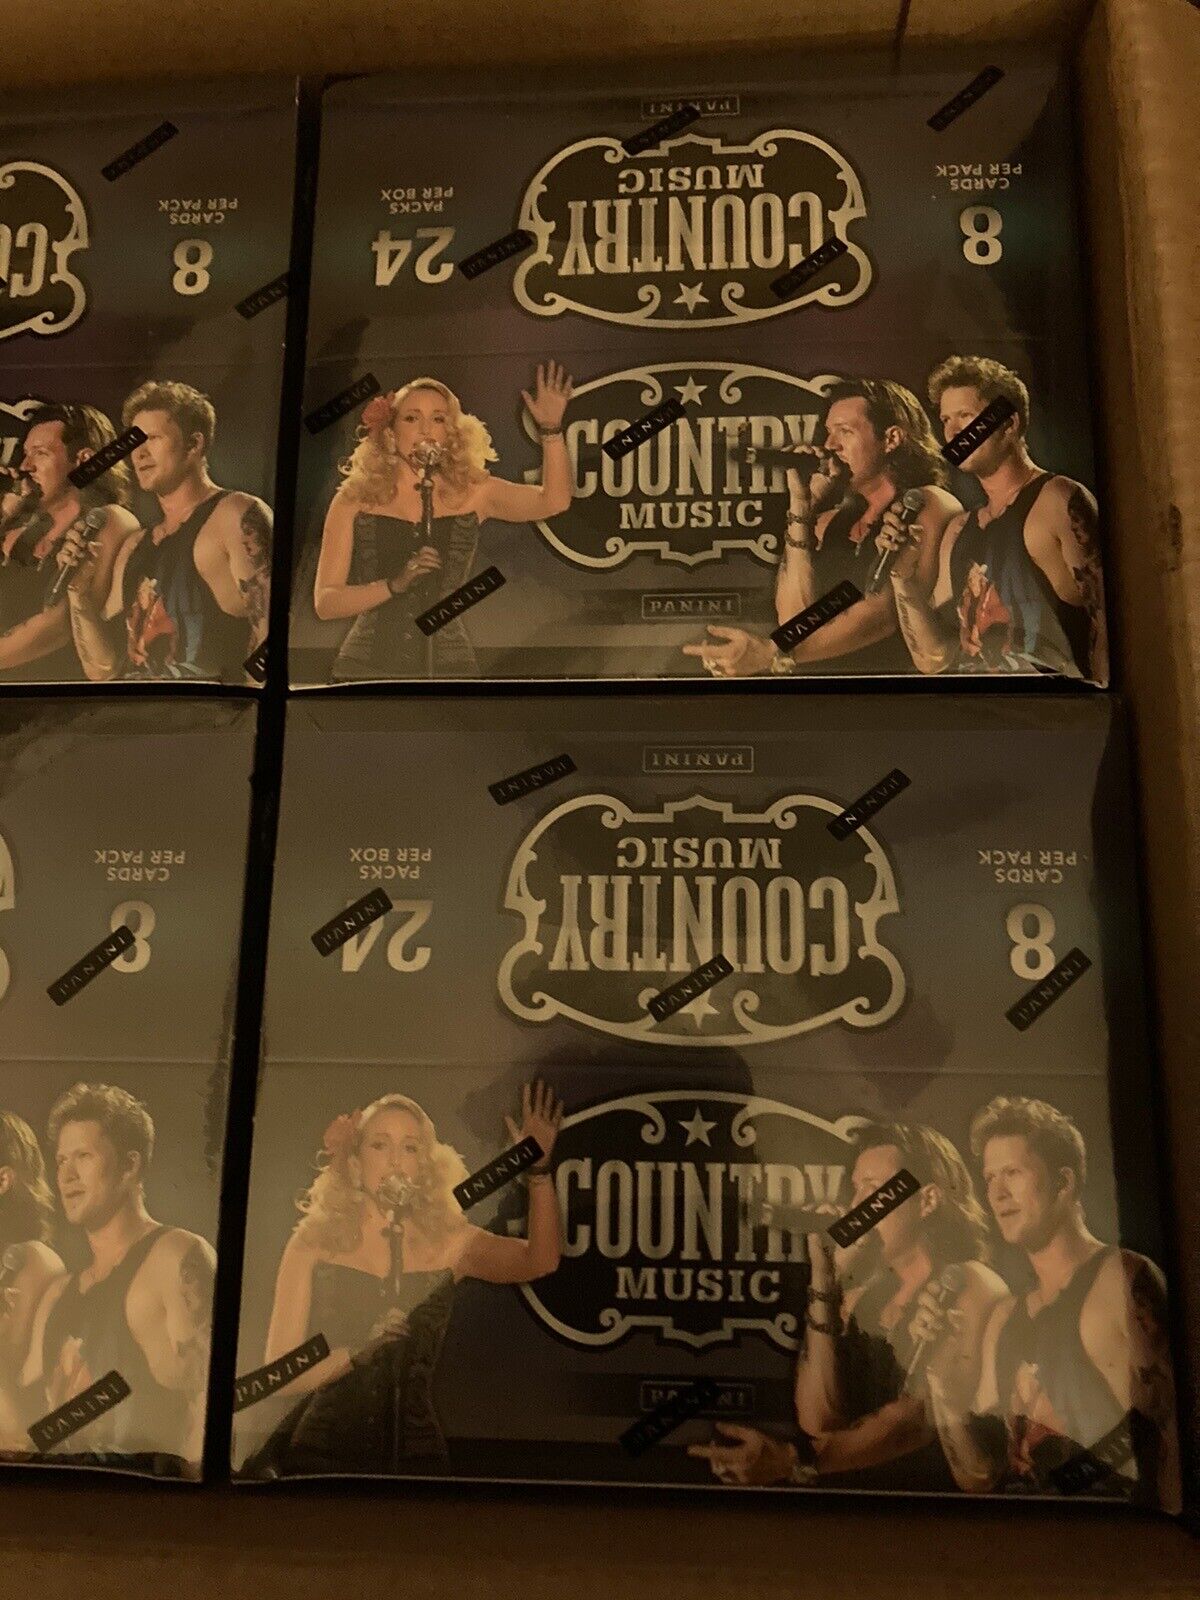 2014 Panini Country Music Factory Sealed Retail Box 24 packs 8 cards per pack